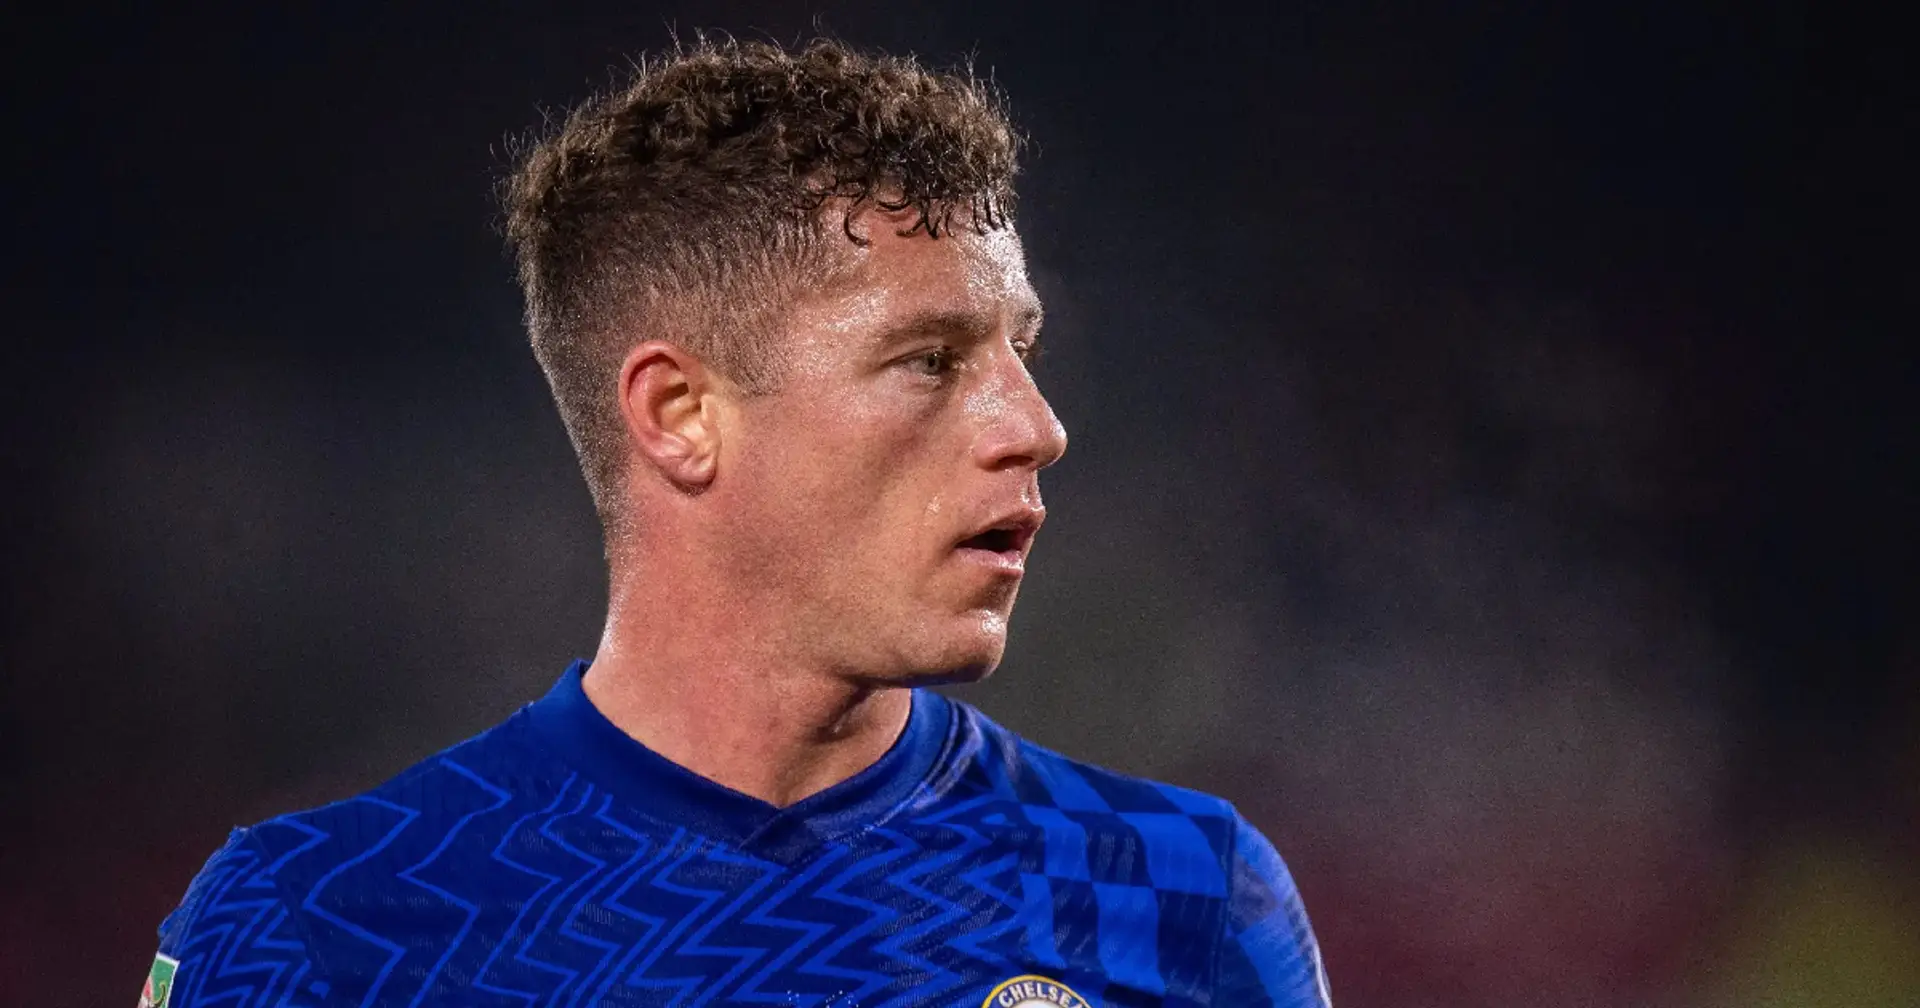 OFFICIAL: Ross Barkley leaves Chelsea by mutual consent